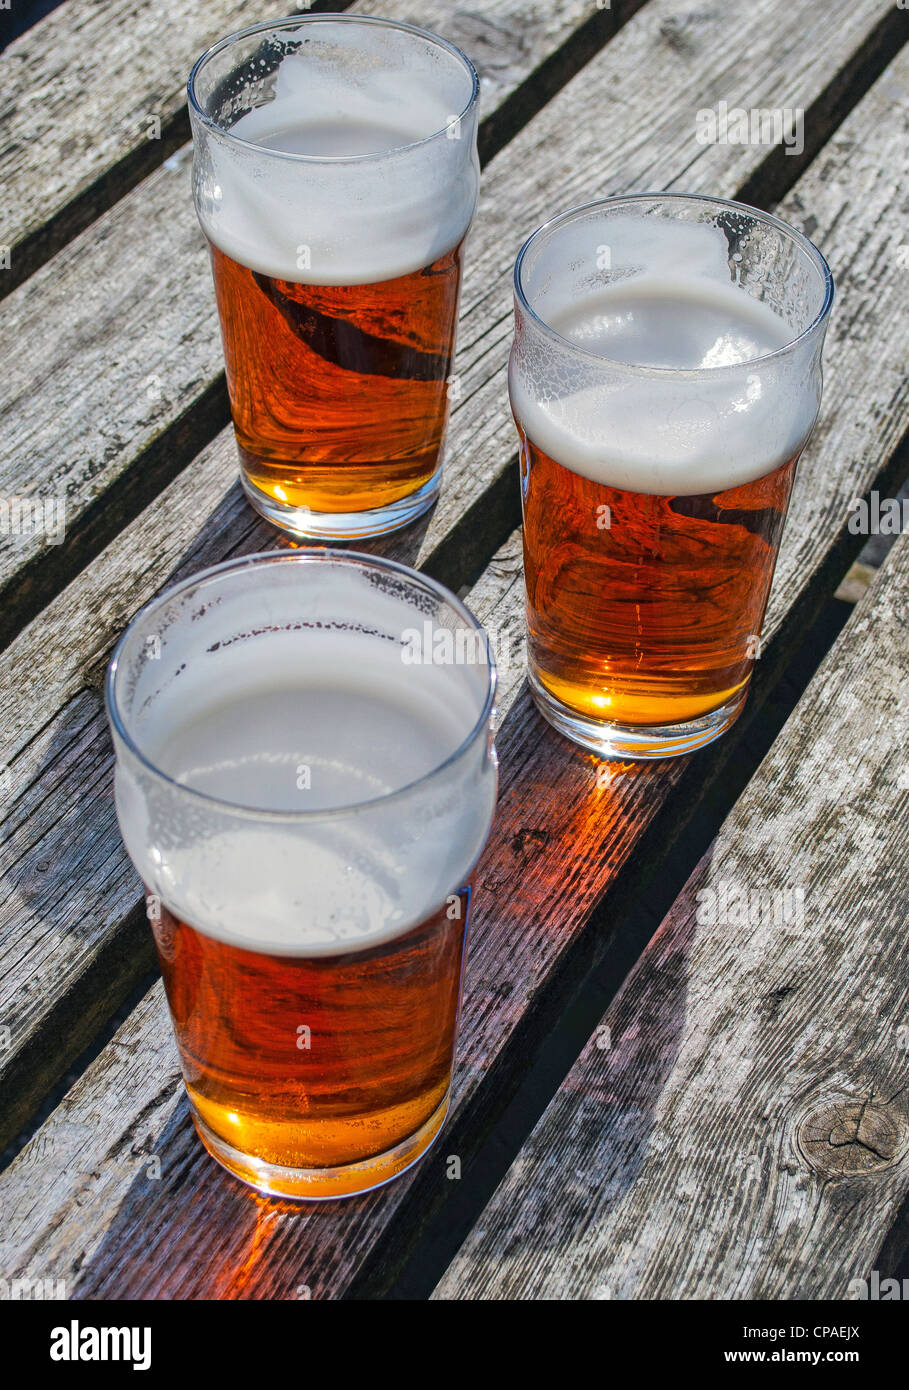 Three pints of ale on wooden table Stock Photo